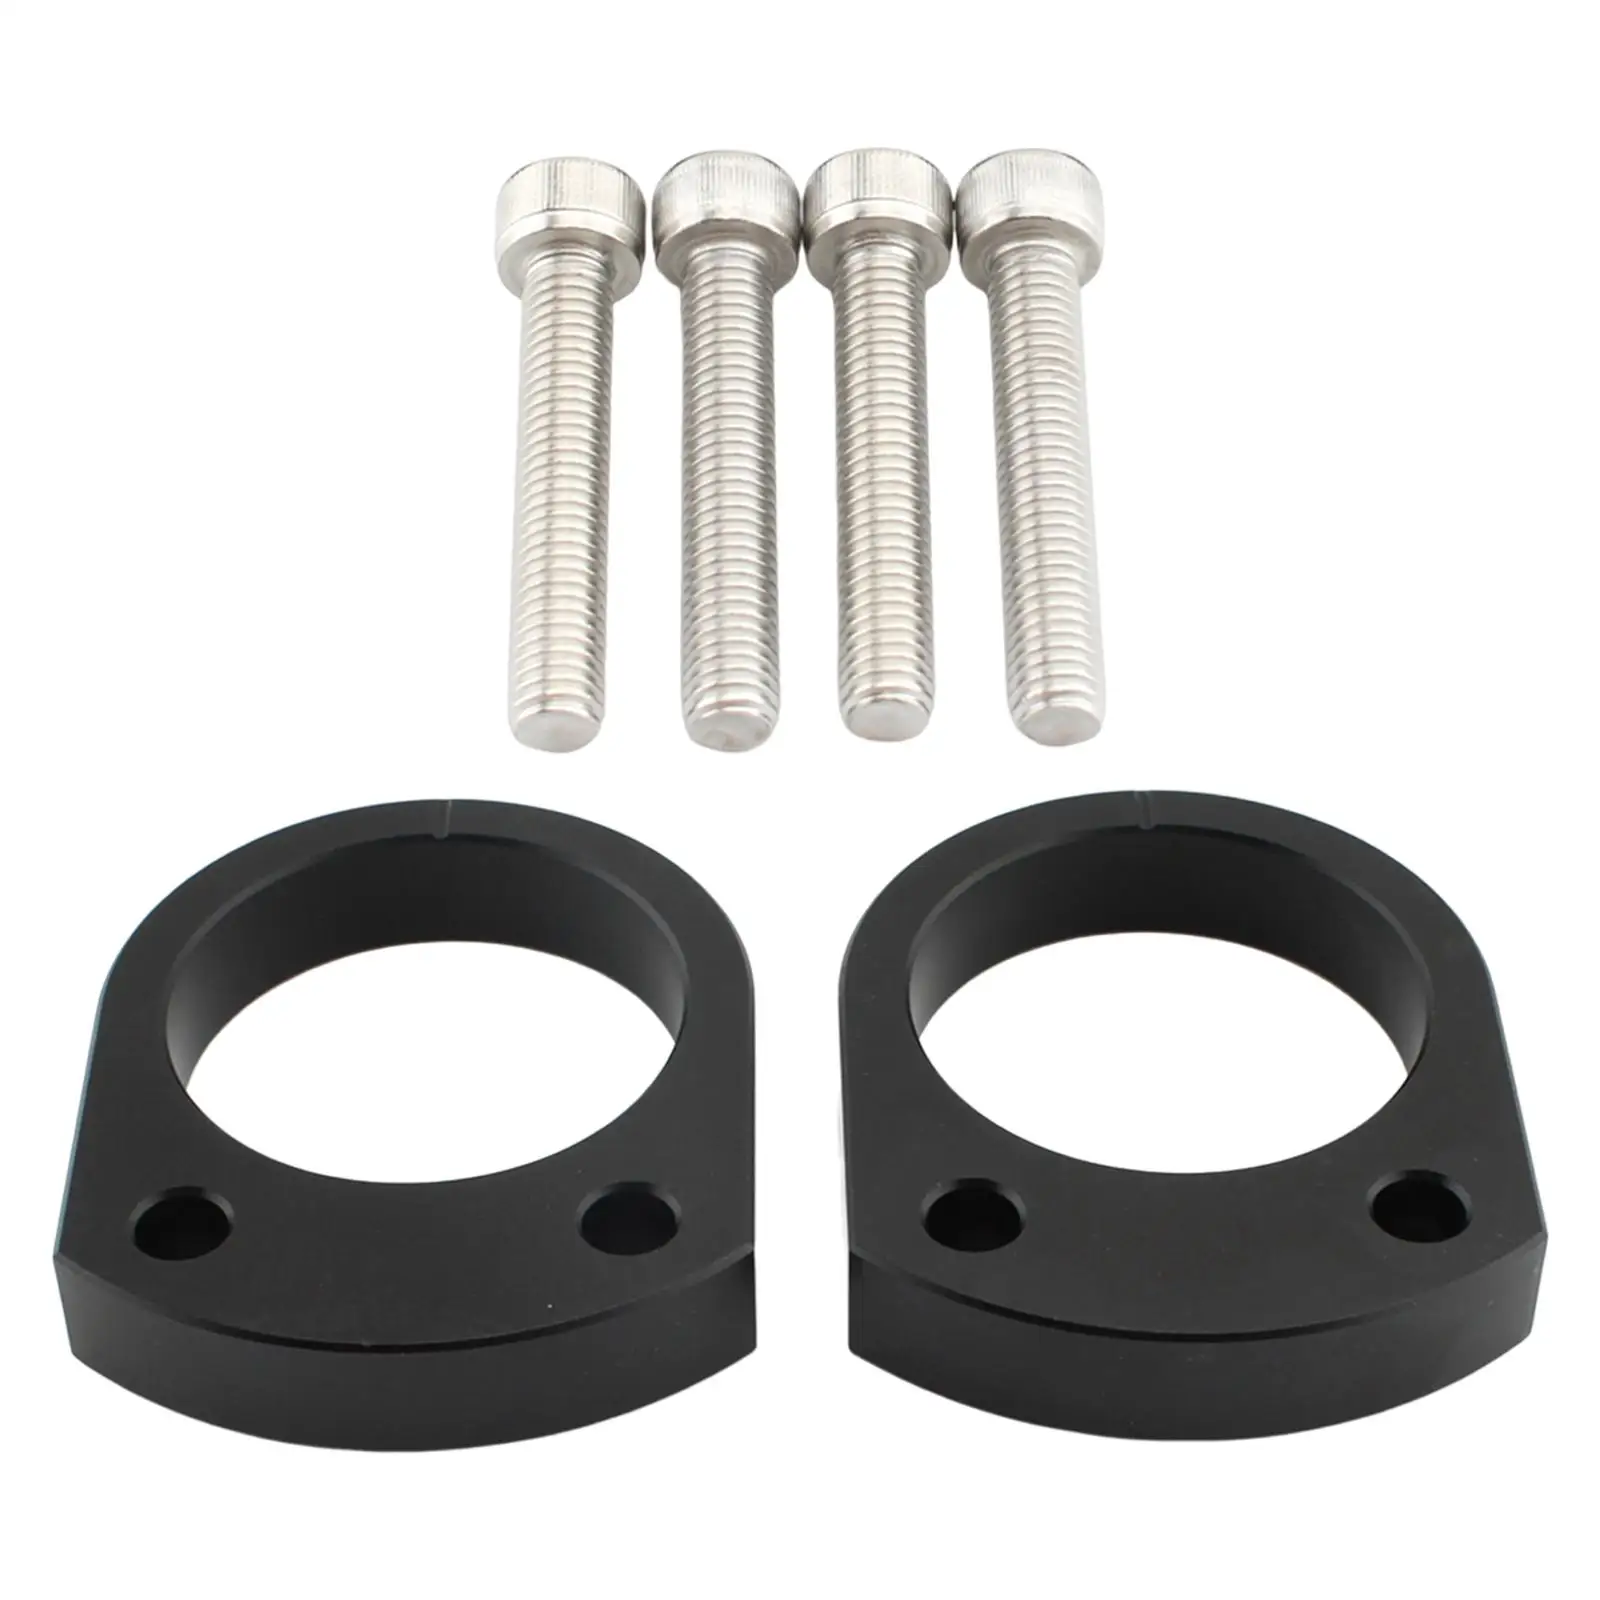 2 Pieces Motorcycle Handlebar Risers 14mm Heightening Lifting Handle Bar Riser Clamp for Kawasaki ZX-14R Zzr1400 2006-2022